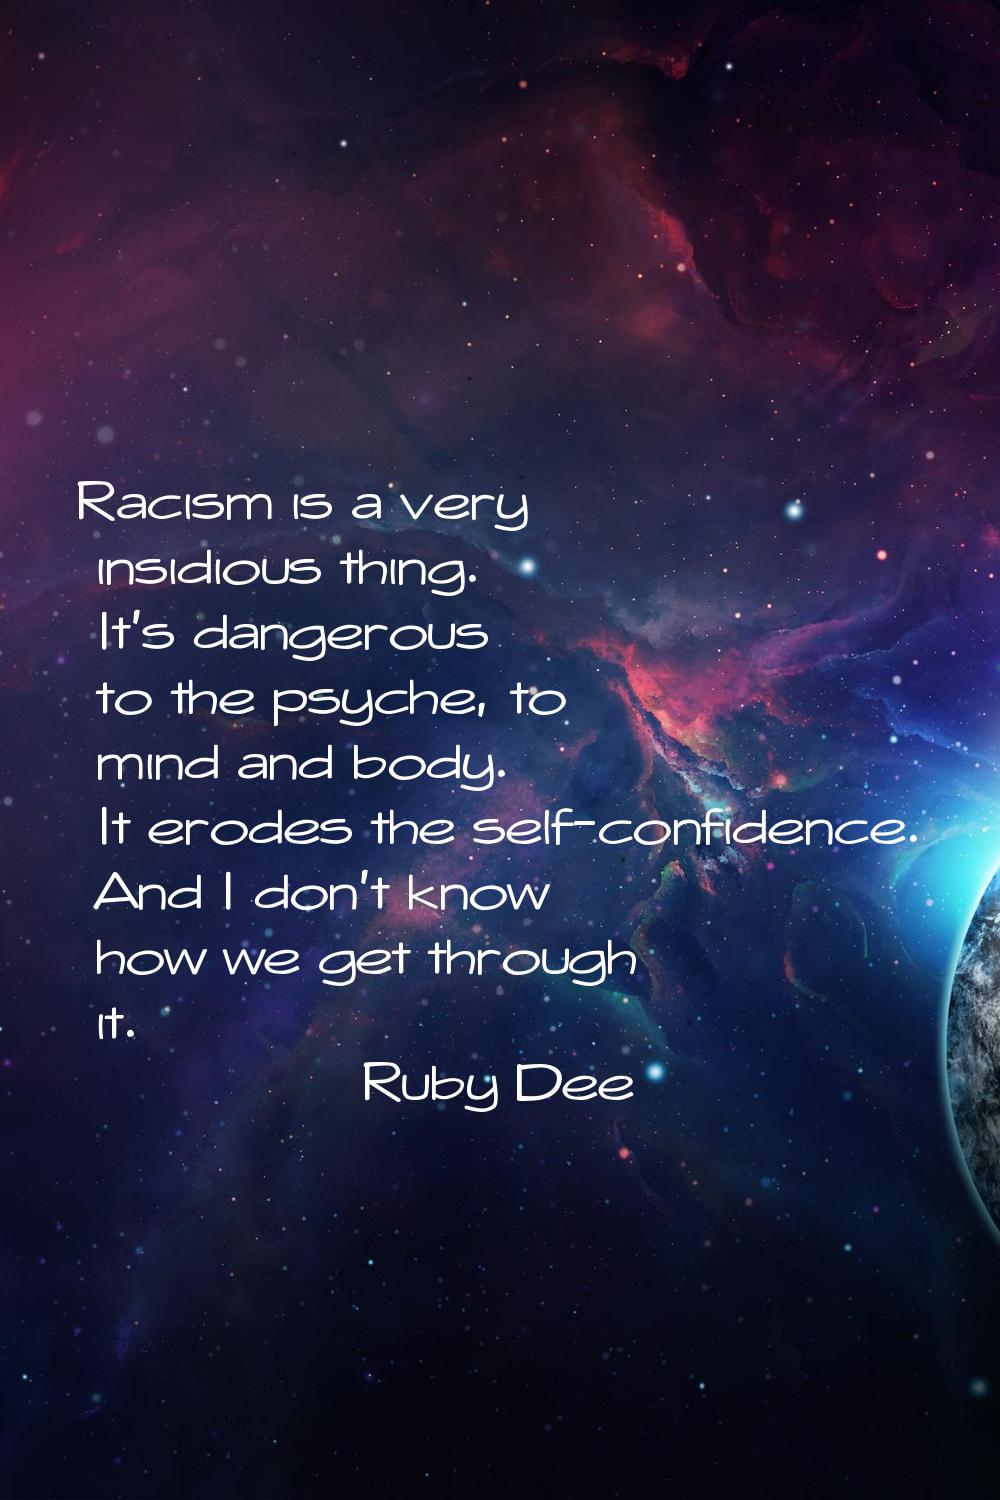 Racism is a very insidious thing. It's dangerous to the psyche, to mind and body. It erodes the sel